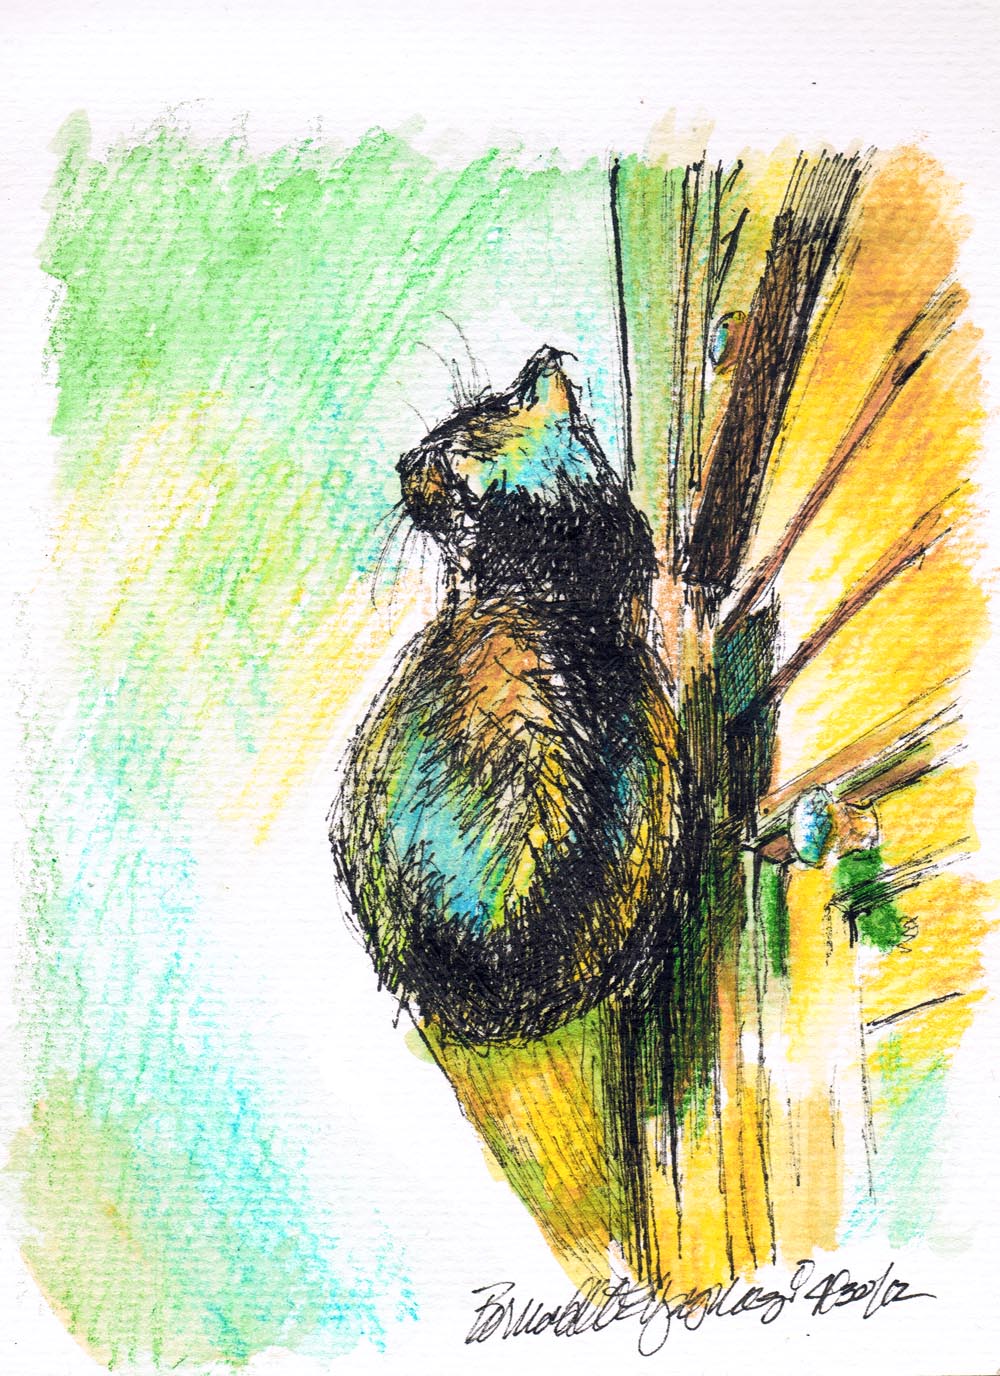 ink and watercolor sketch of a cat